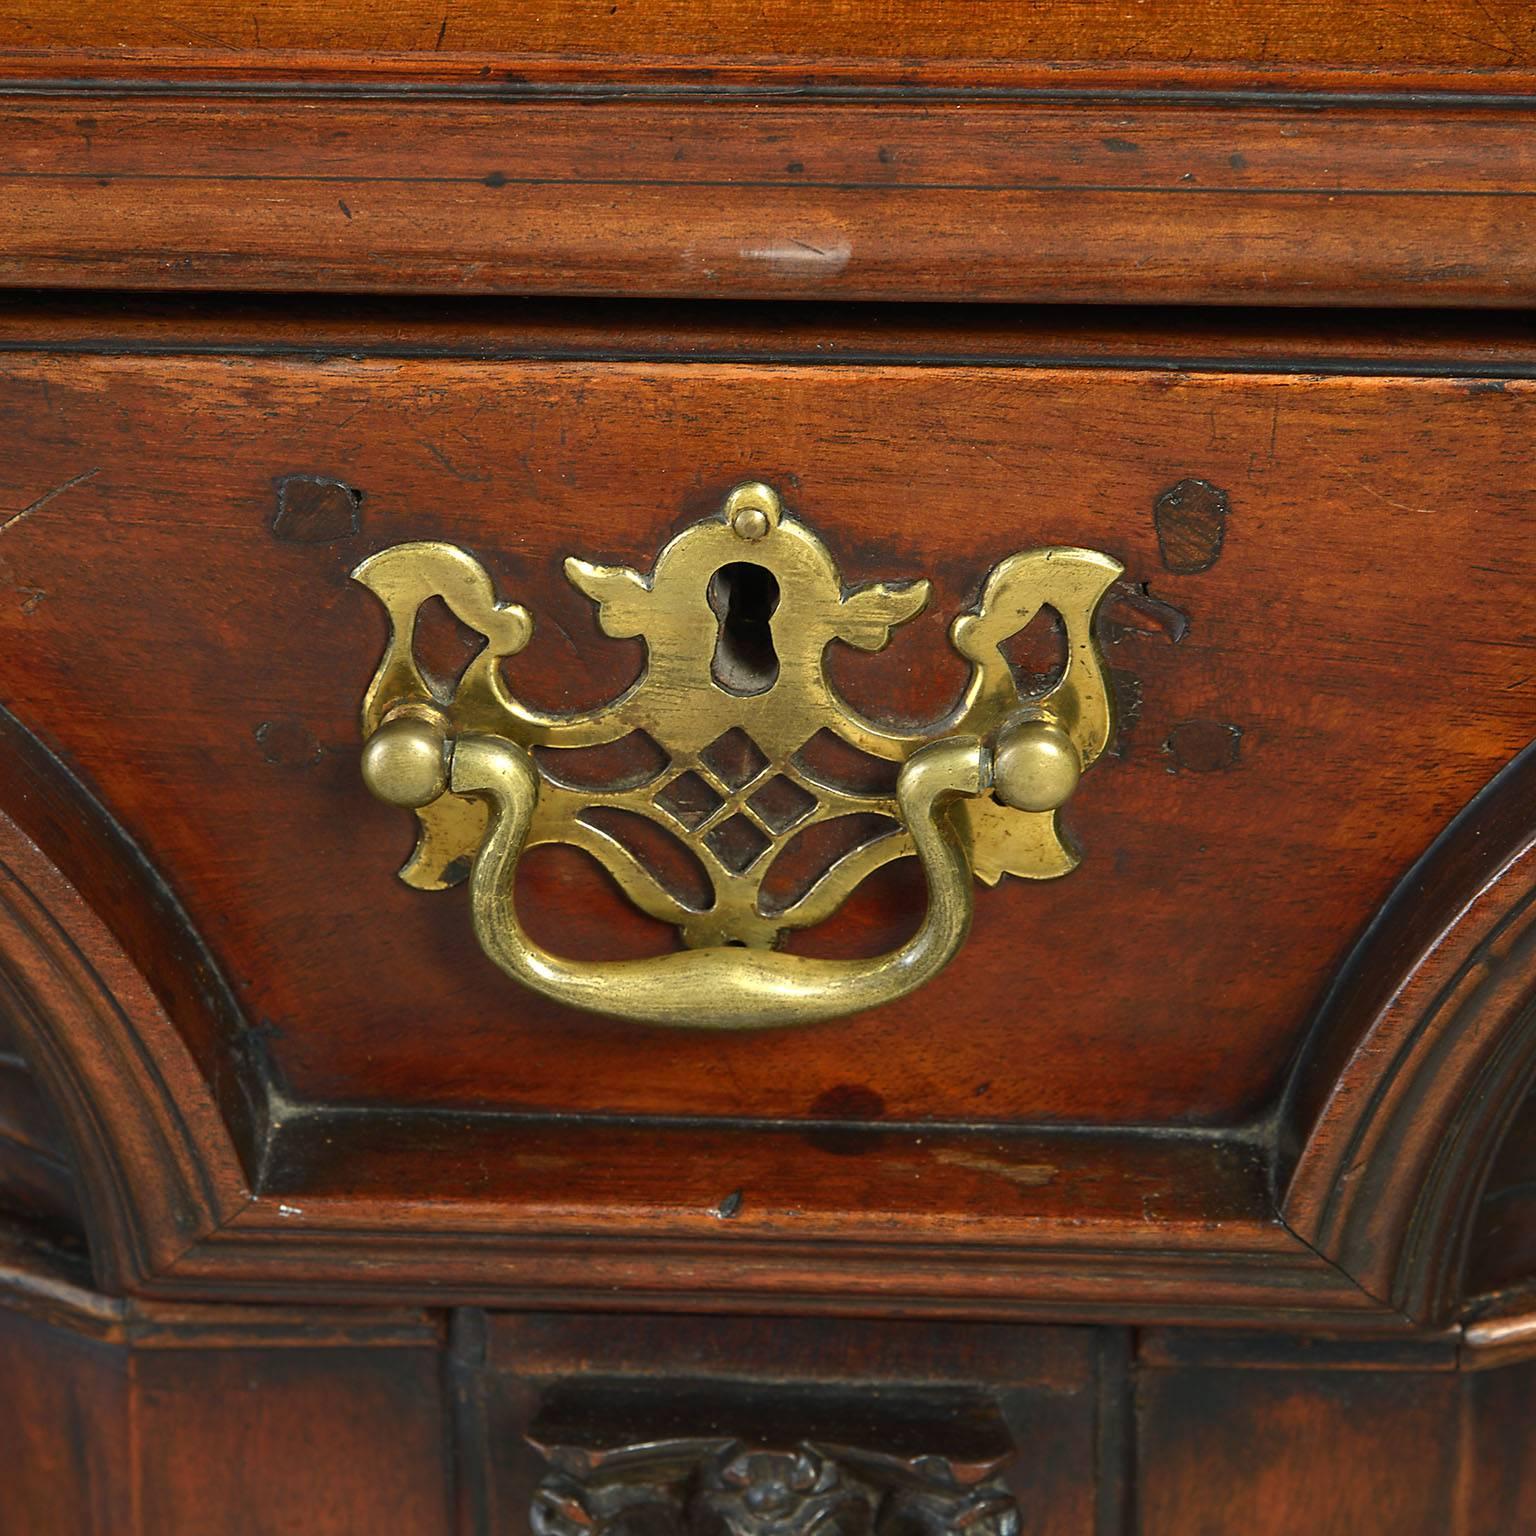 Carved Rare George II Mahogany Architect's Cabinet or Desk For Sale